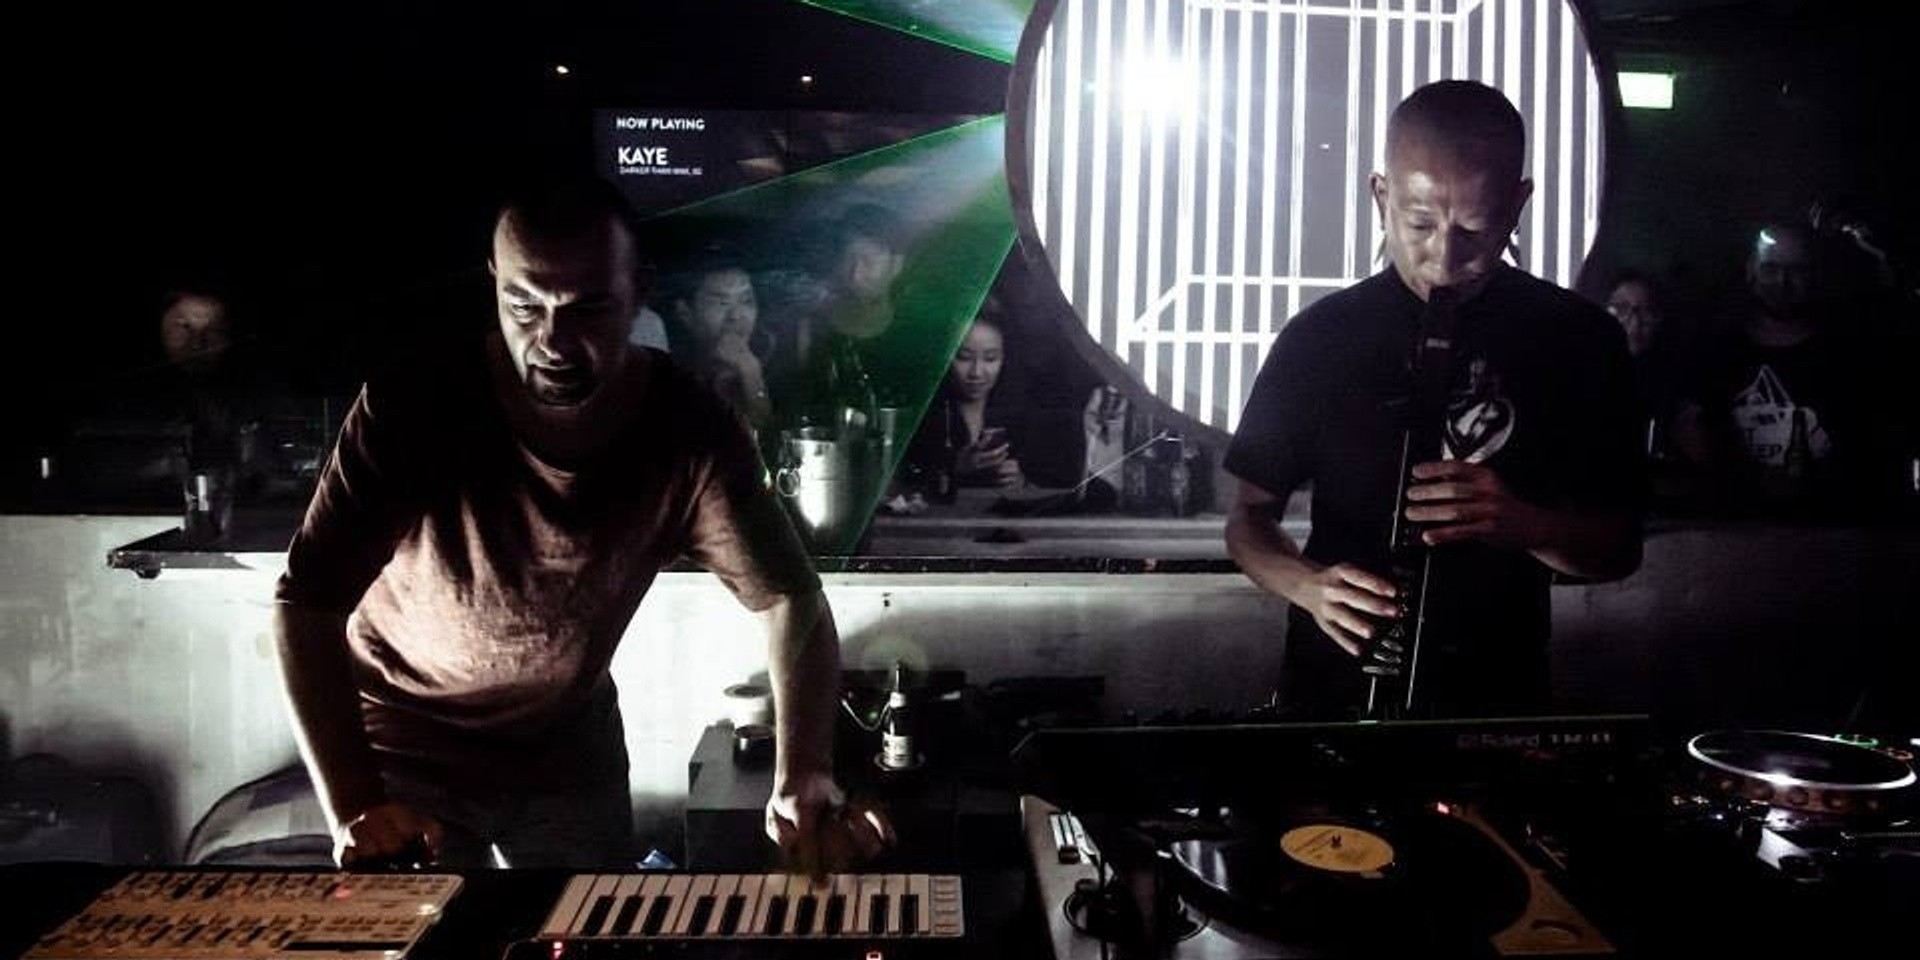 WATCH: KiNK teams up with KAYE for a spectacular live techno set at kyo 